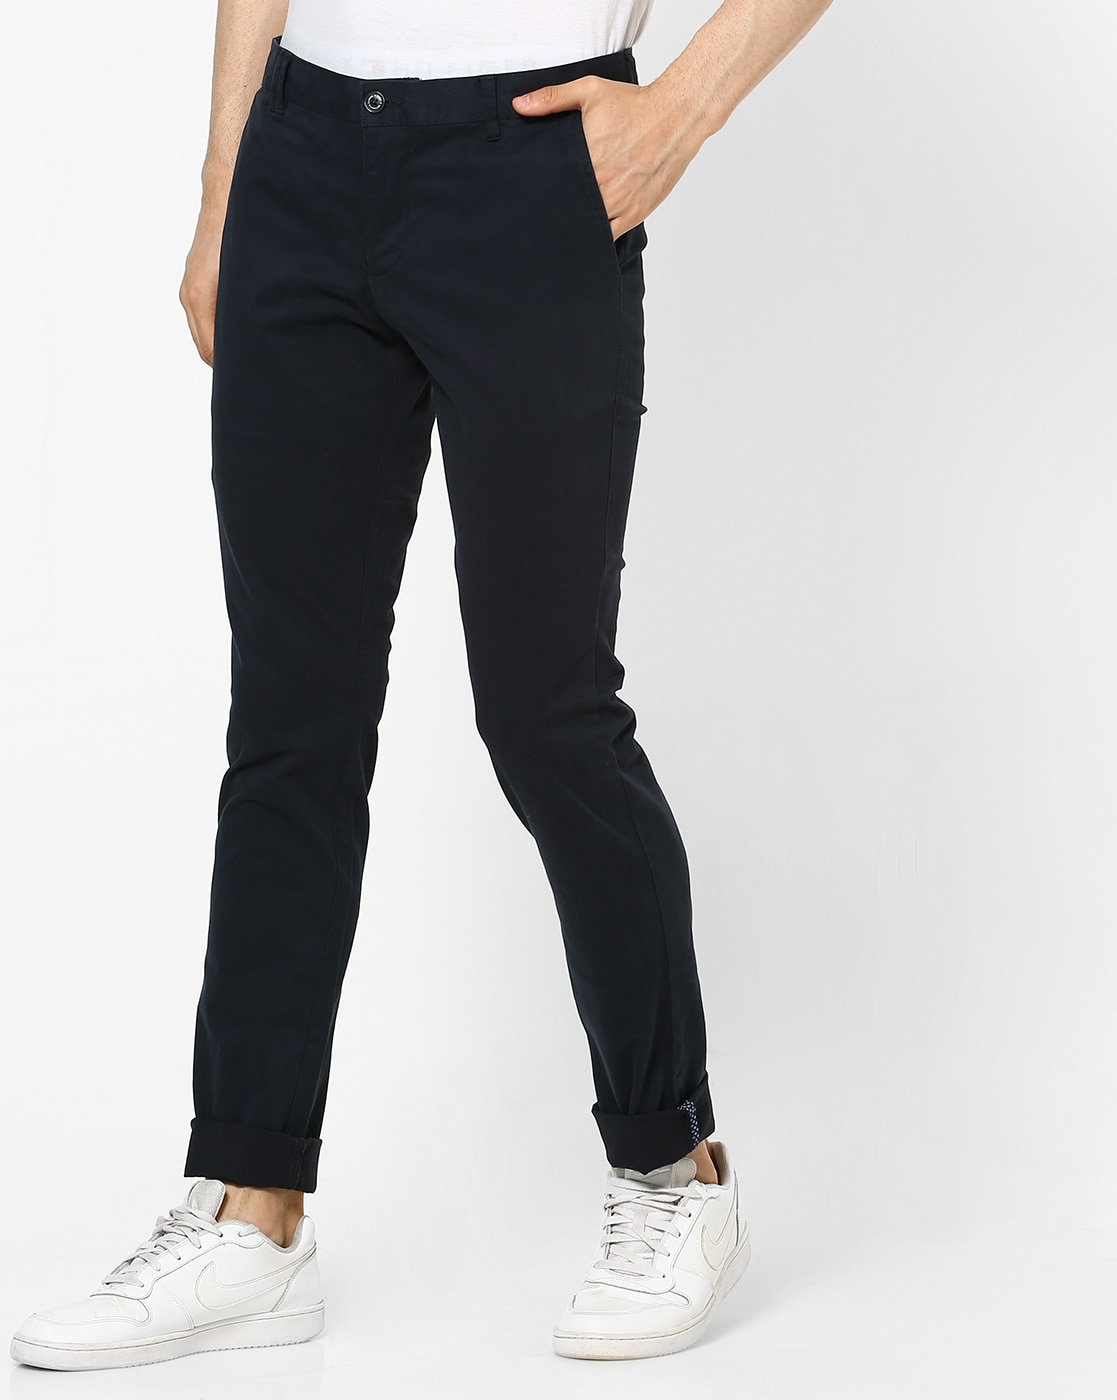 Buy cotrise trousers for women in India @ Limeroad